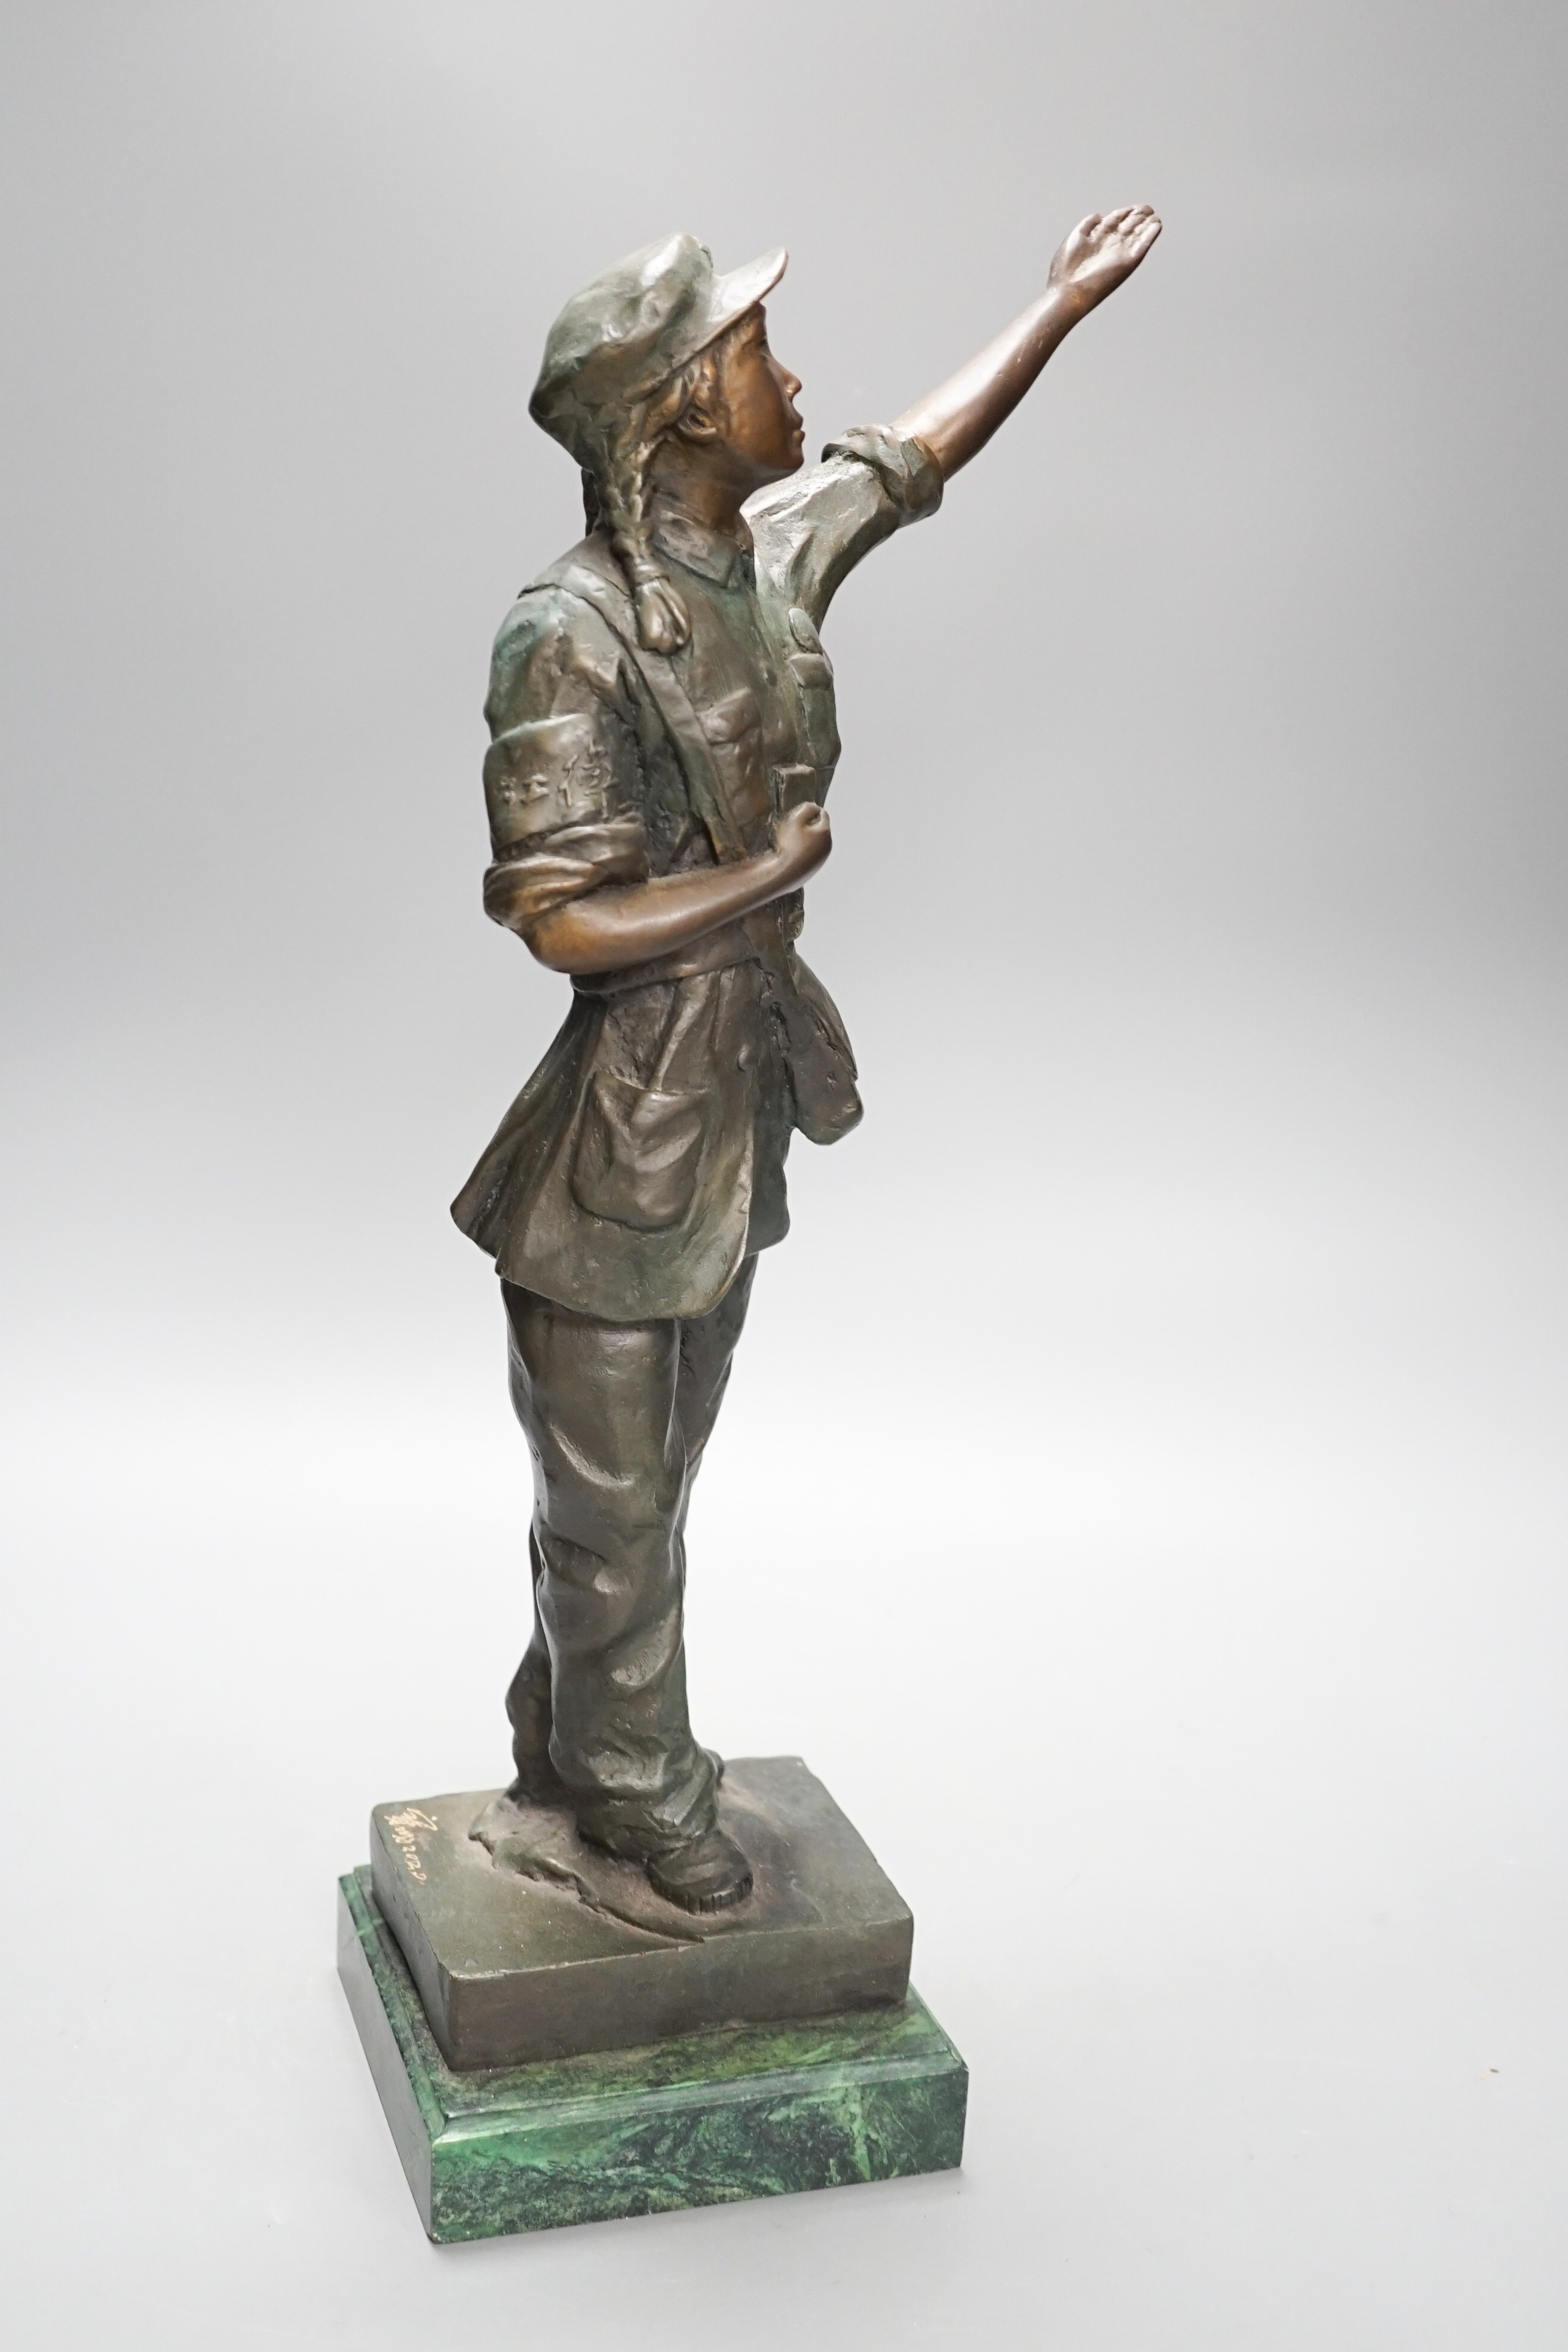 Le Bao bronze figure, a Red guard from Chinese revolutionary opera, 2020. 46cm - Image 3 of 6